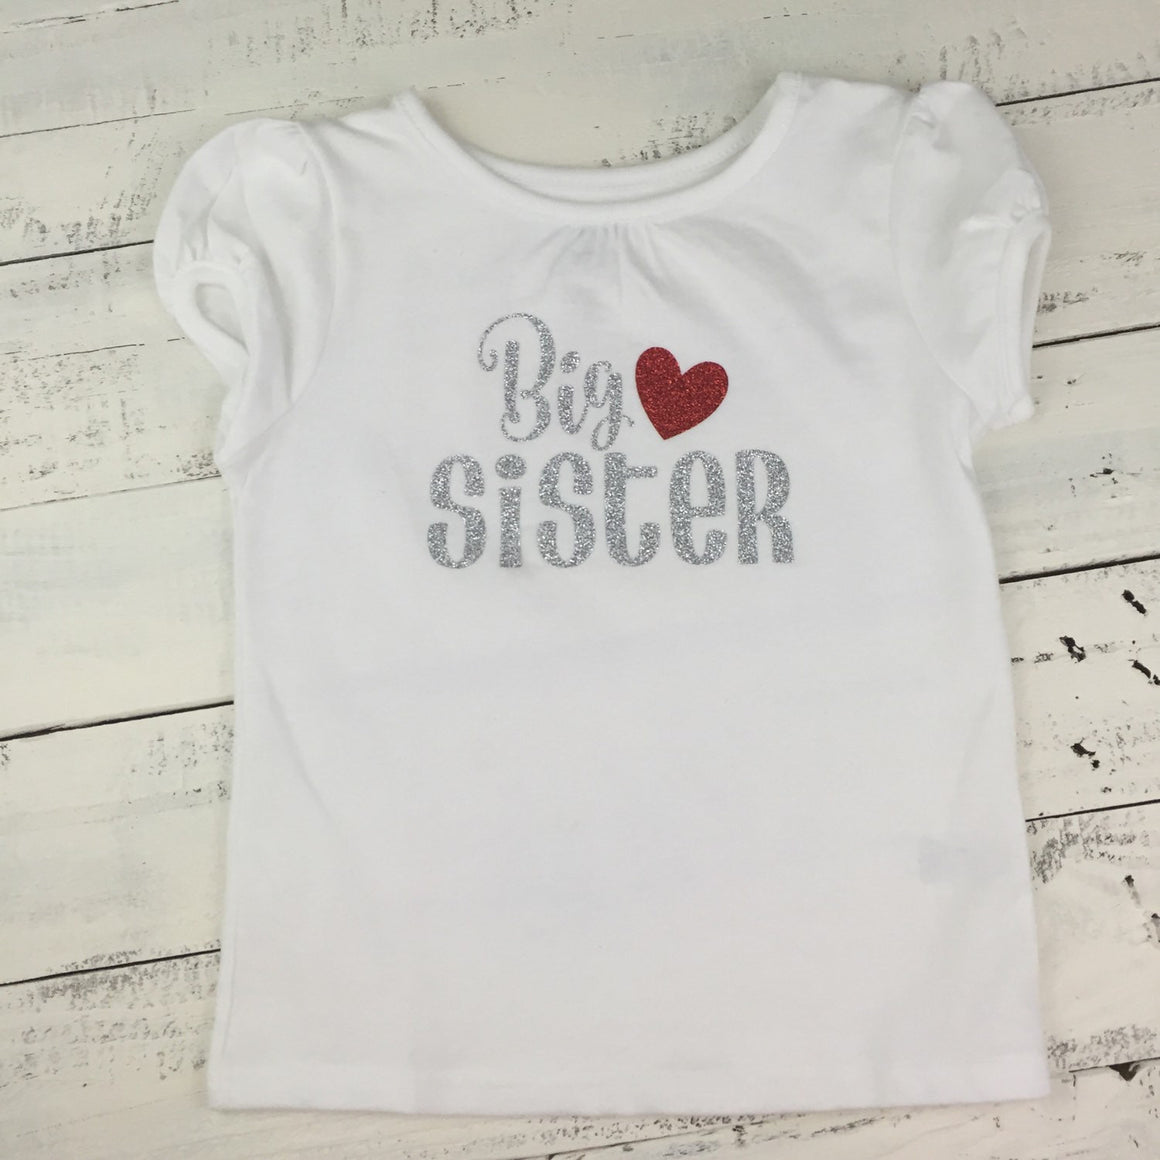 Sister bodysuits and shirts - Silver/Red glitter - HoneyLoveBoutique